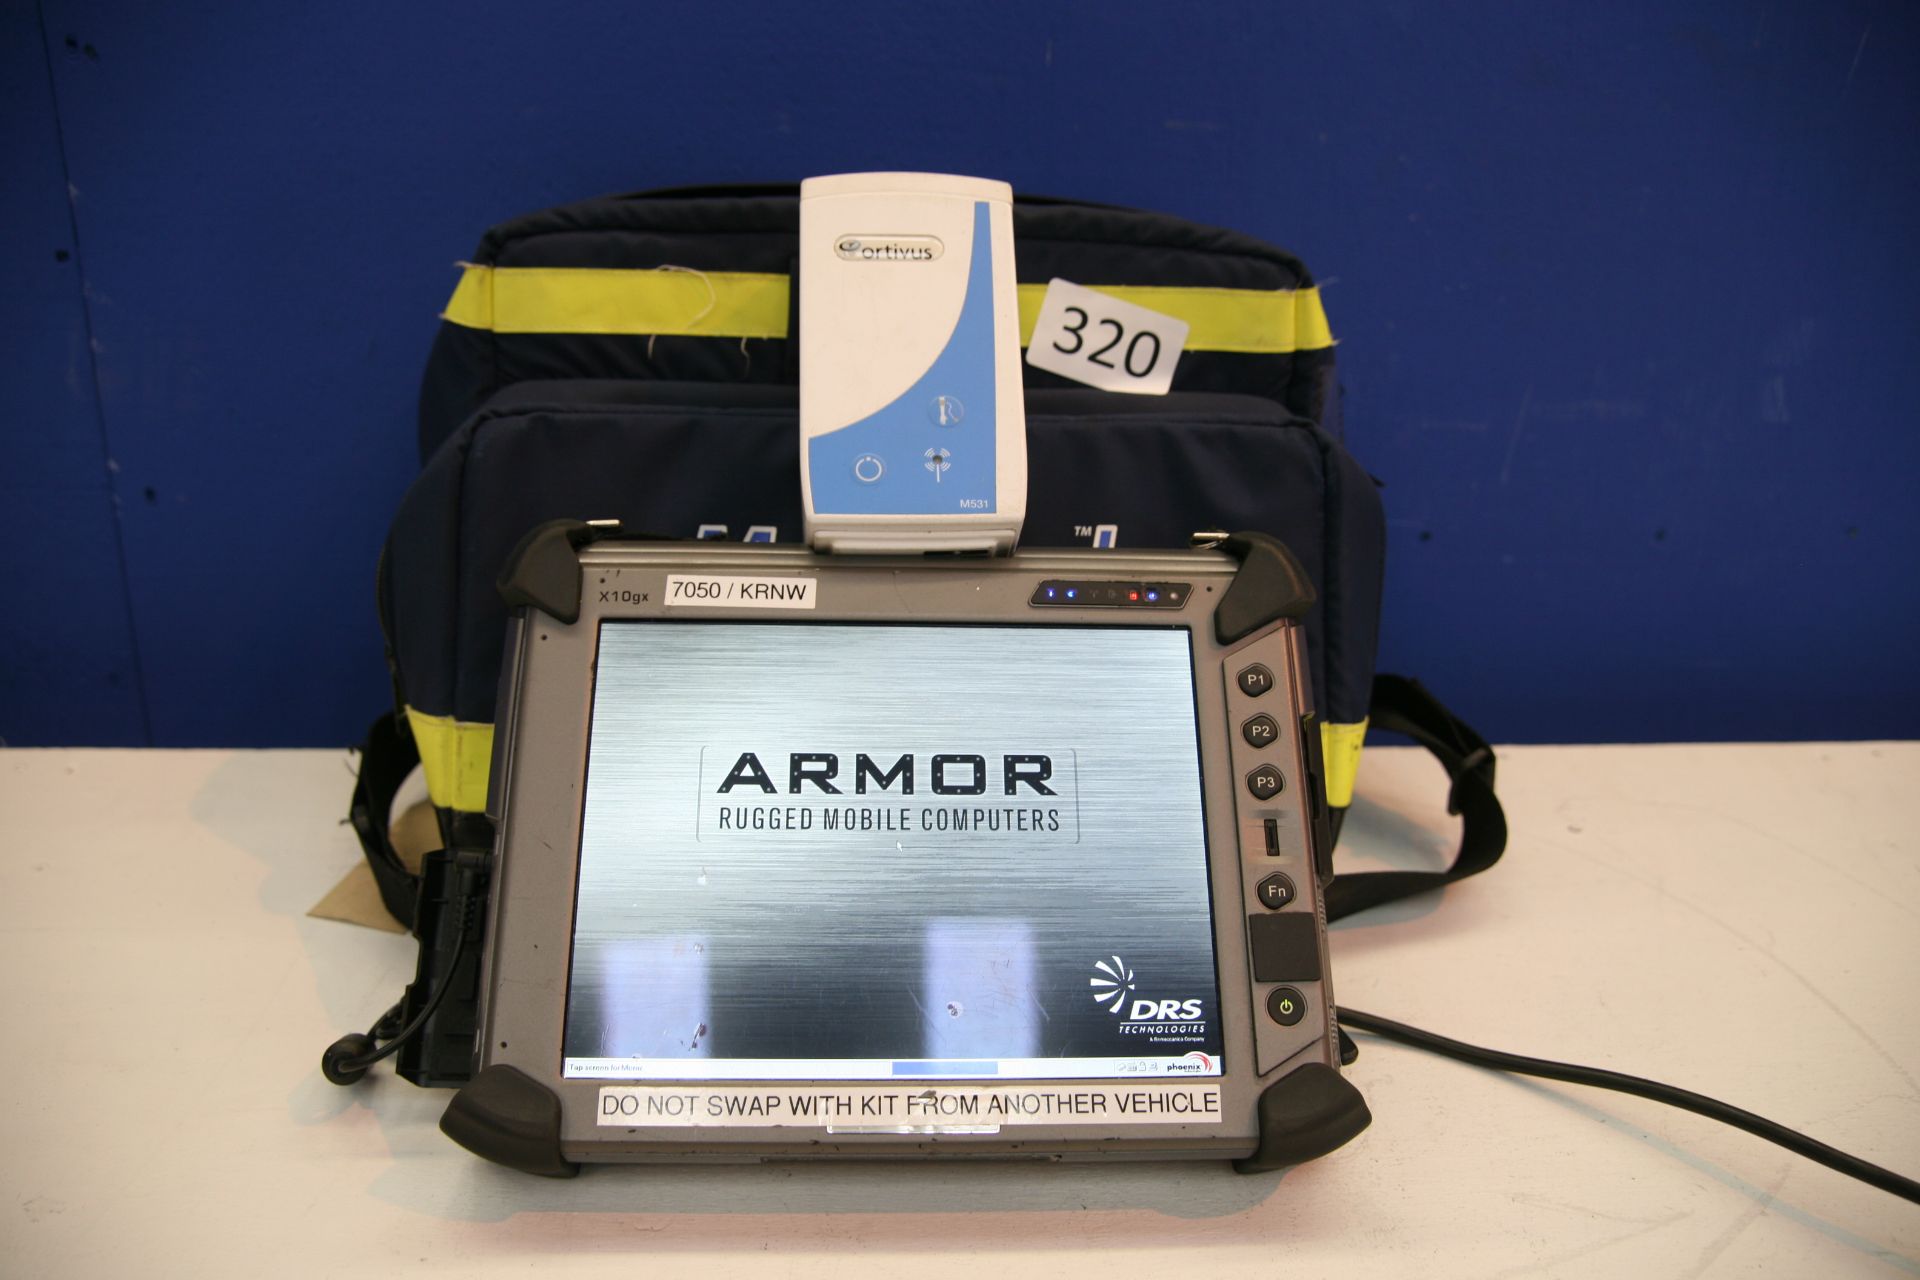 Armor X10gx Electric Patient Care Reporting Ambulatory monitor With Ortivus M531 And Battery